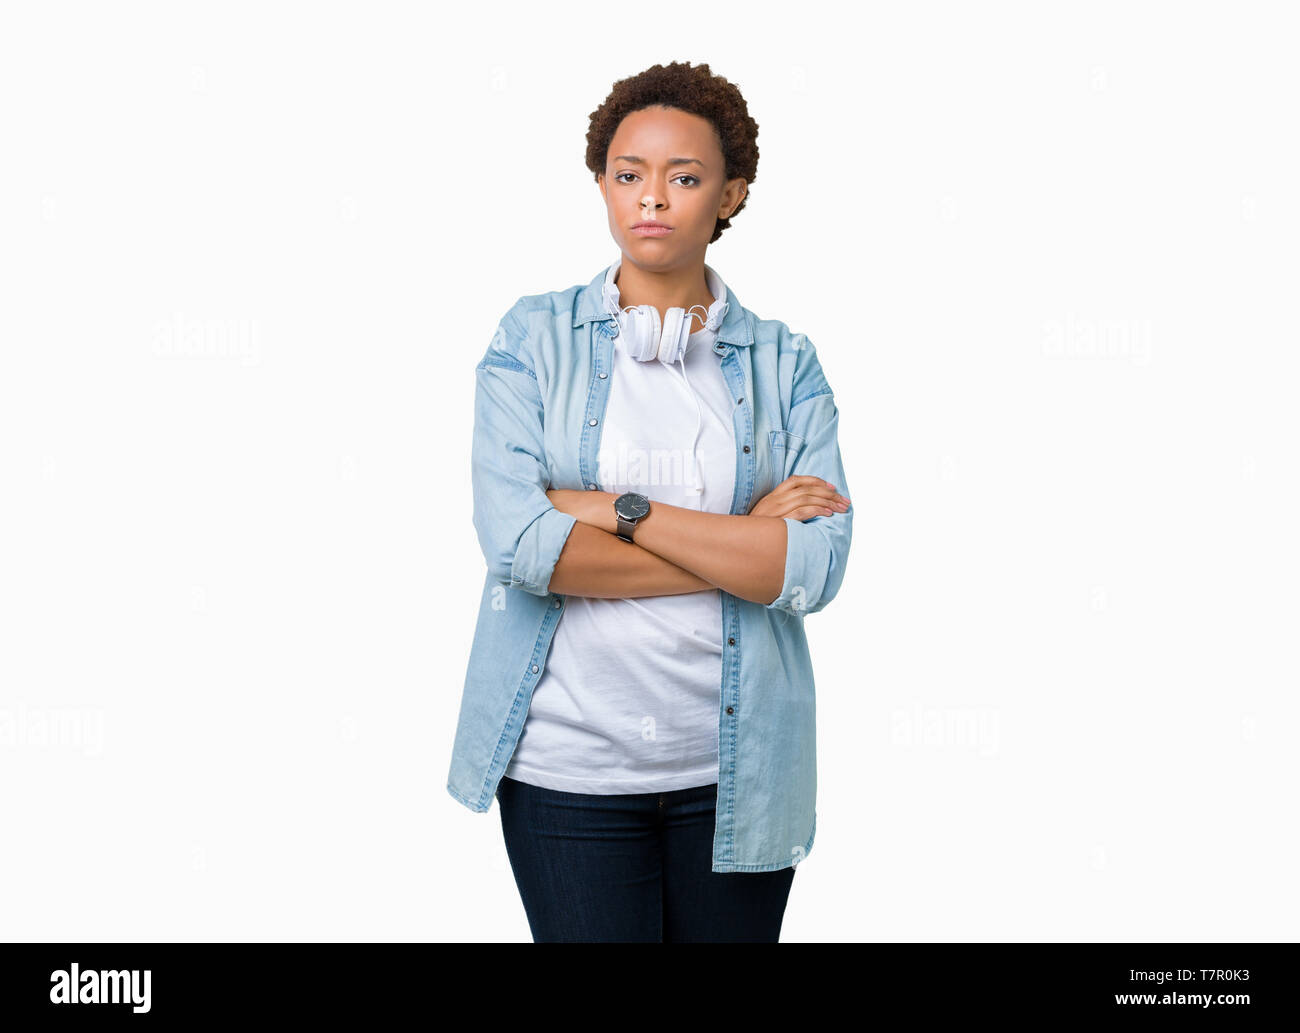 Young african american woman wearing headphones over isolated background skeptic and nervous, disapproving expression on face with crossed arms. Negat Stock Photo